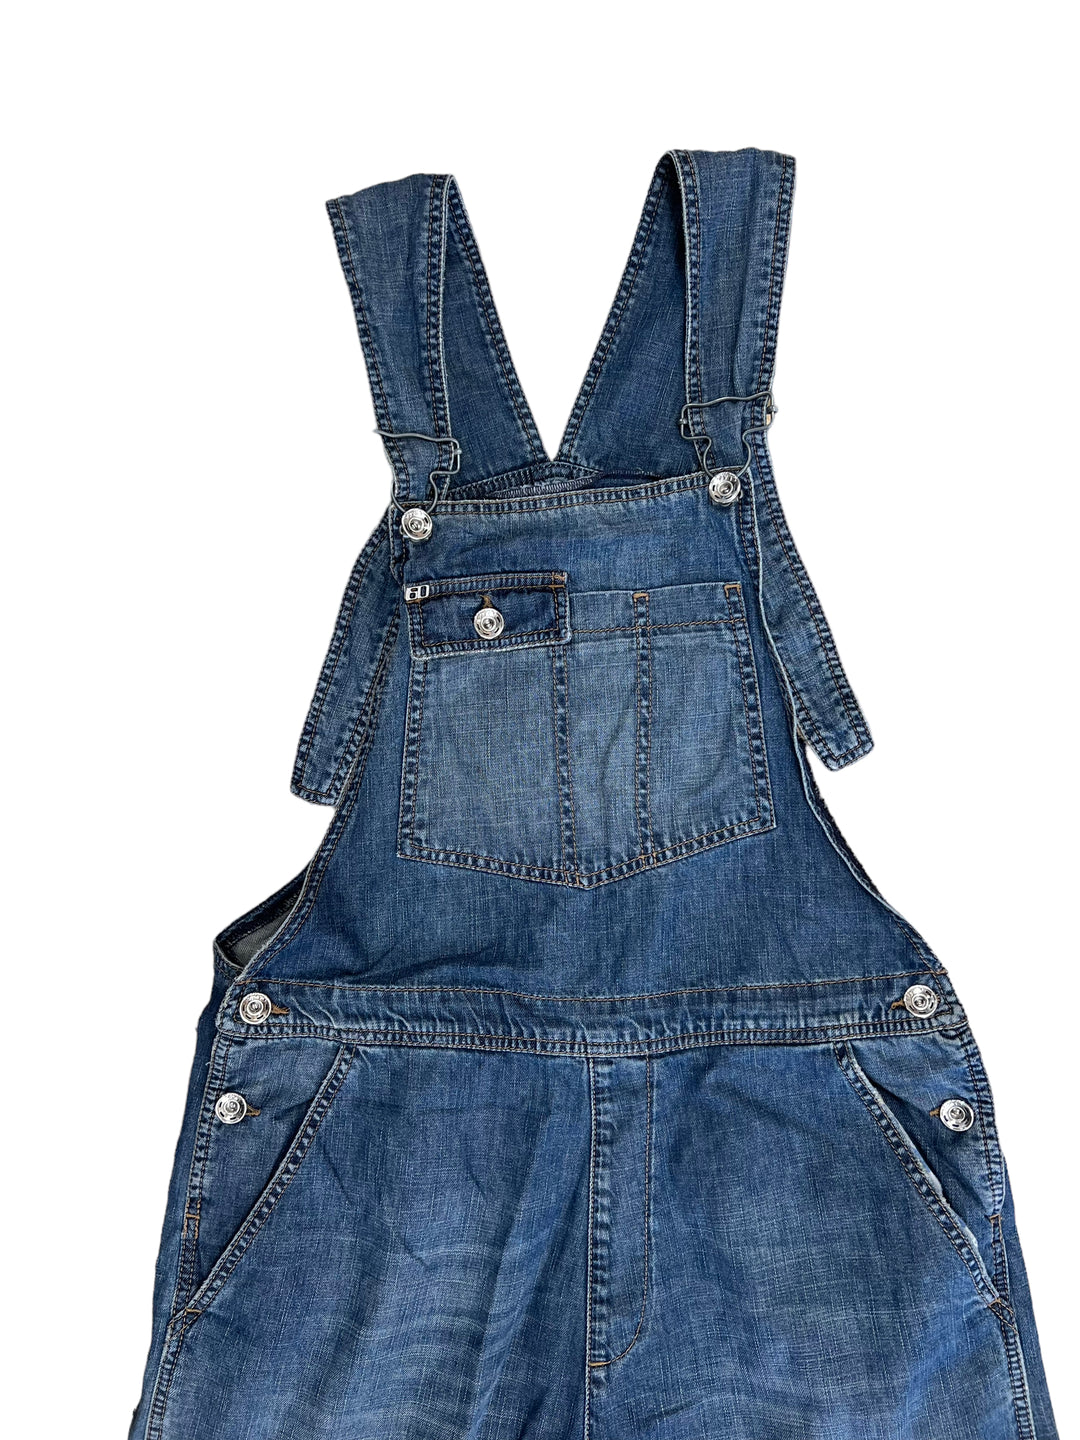 Miss Sixty Denim Overall Women’s Large